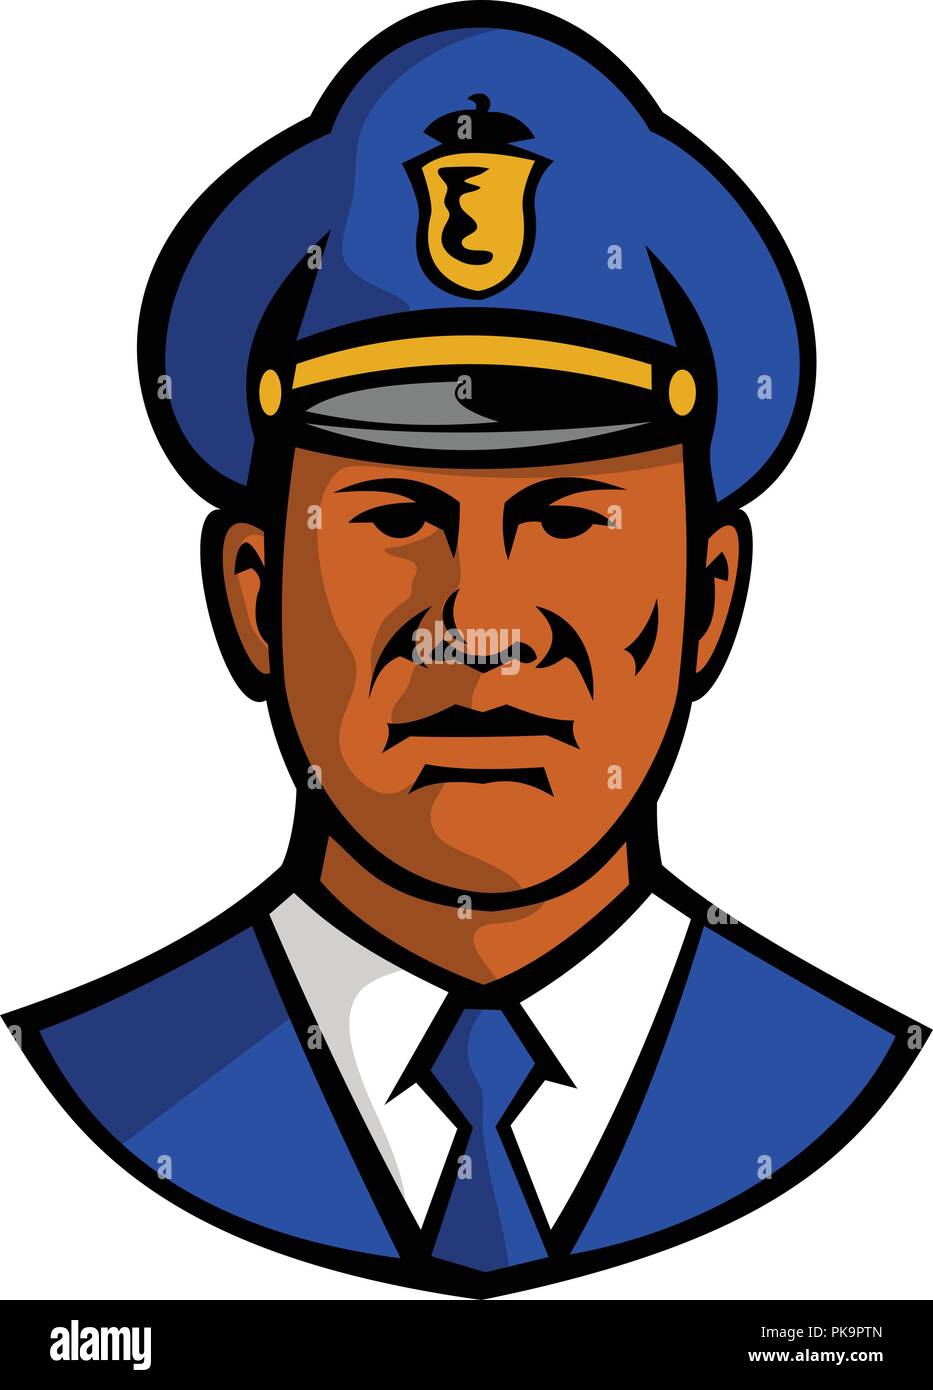 Mascot illustration of bust of a black African American policeman or police officer wearing hat viewed from front on isolated white background. Stock Vector